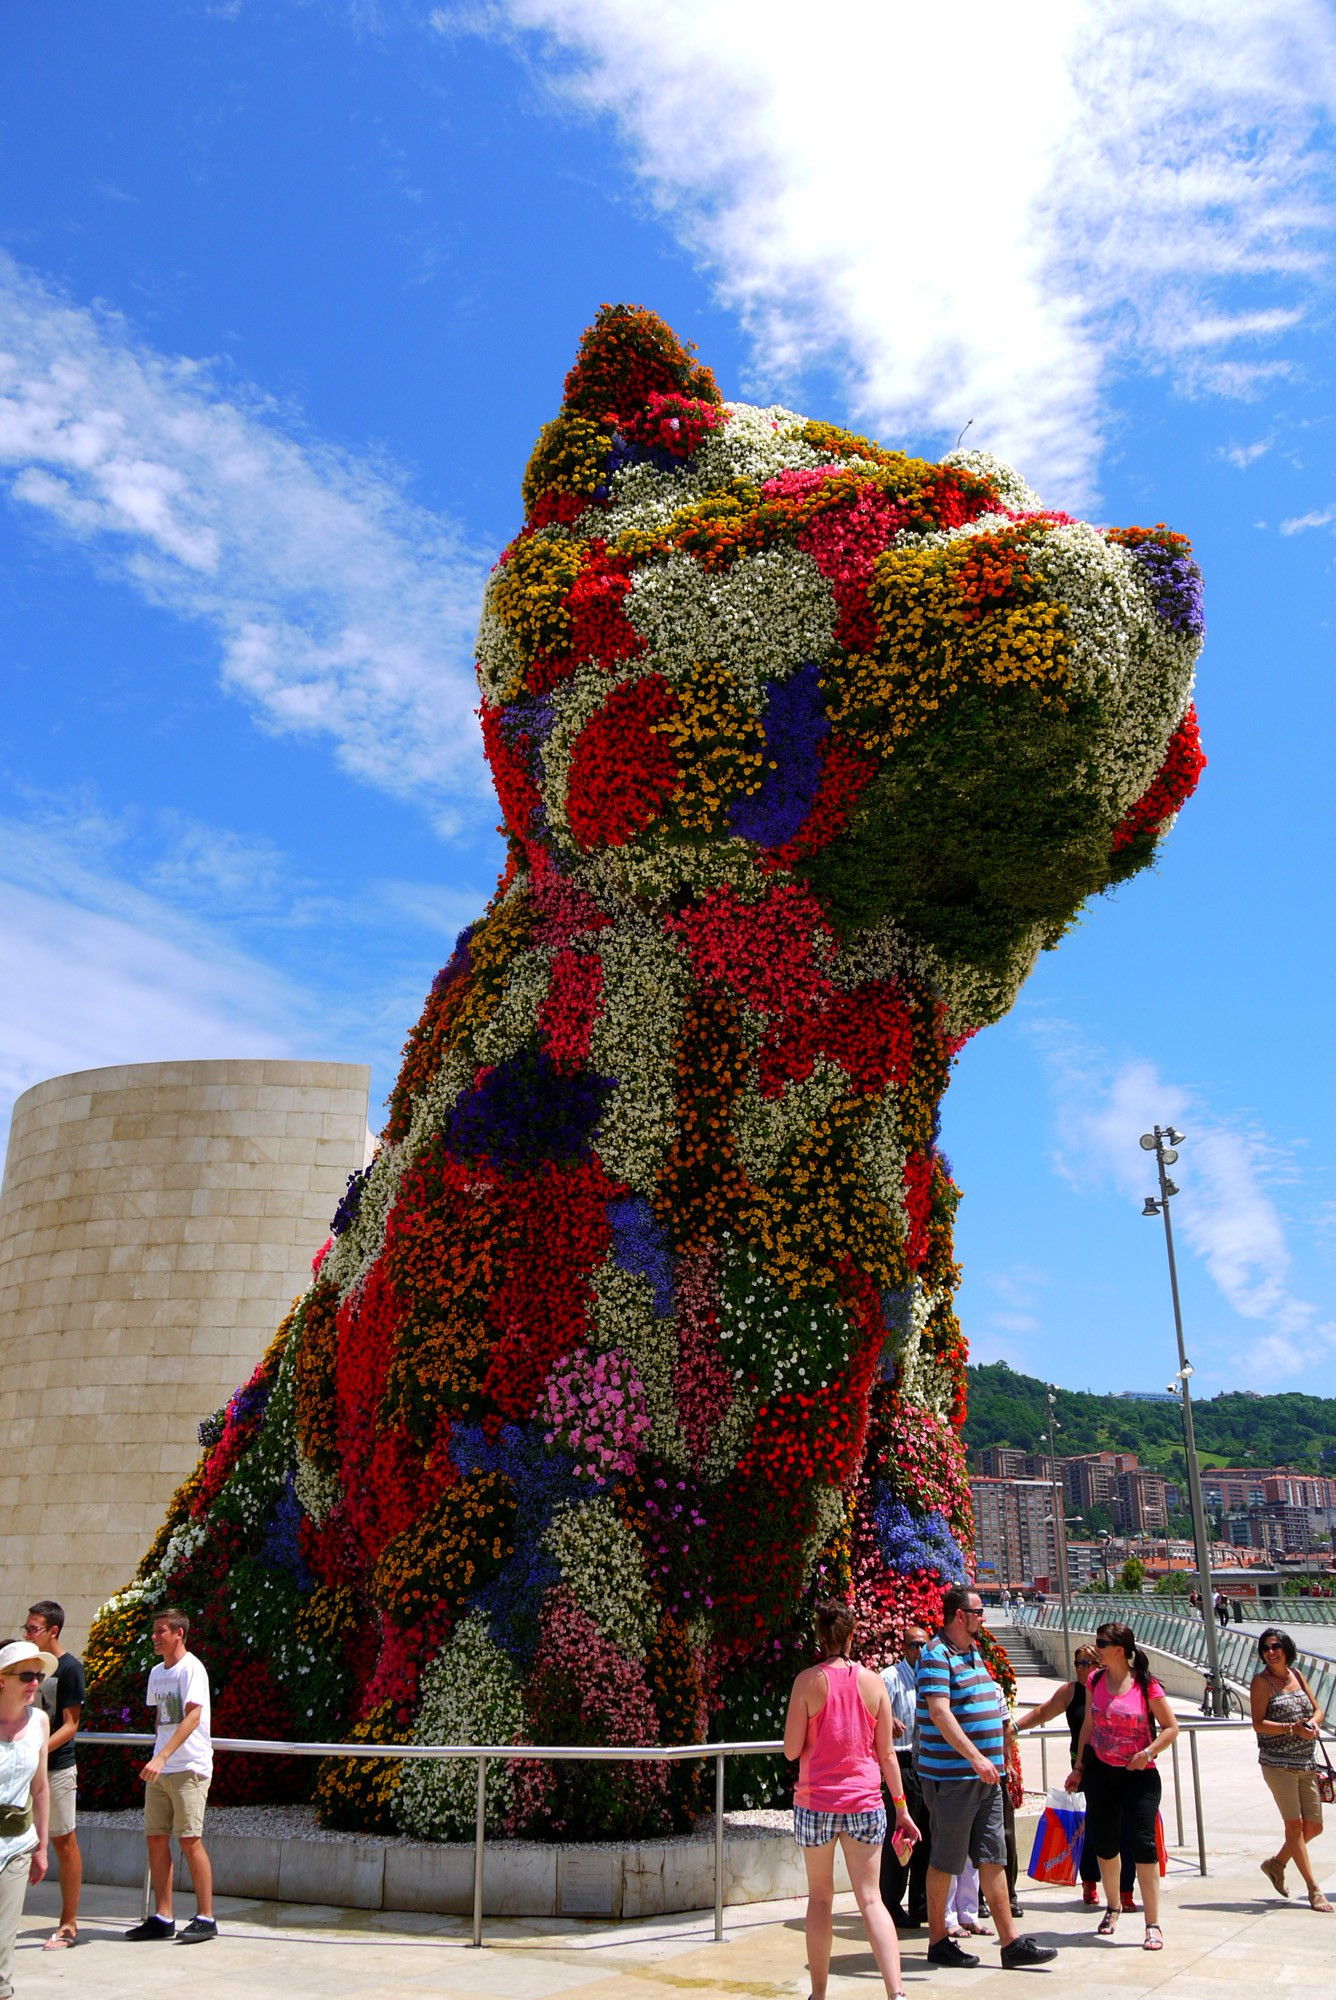 18 Stylish Jeff Koons Puppy Vase Price 2024 free download jeff koons puppy vase price of bilbao hitch hiking budget travelling hitch hikers handbook with regard to close up of puppy 1992 by jeff koons outside the guggenheim museum taken